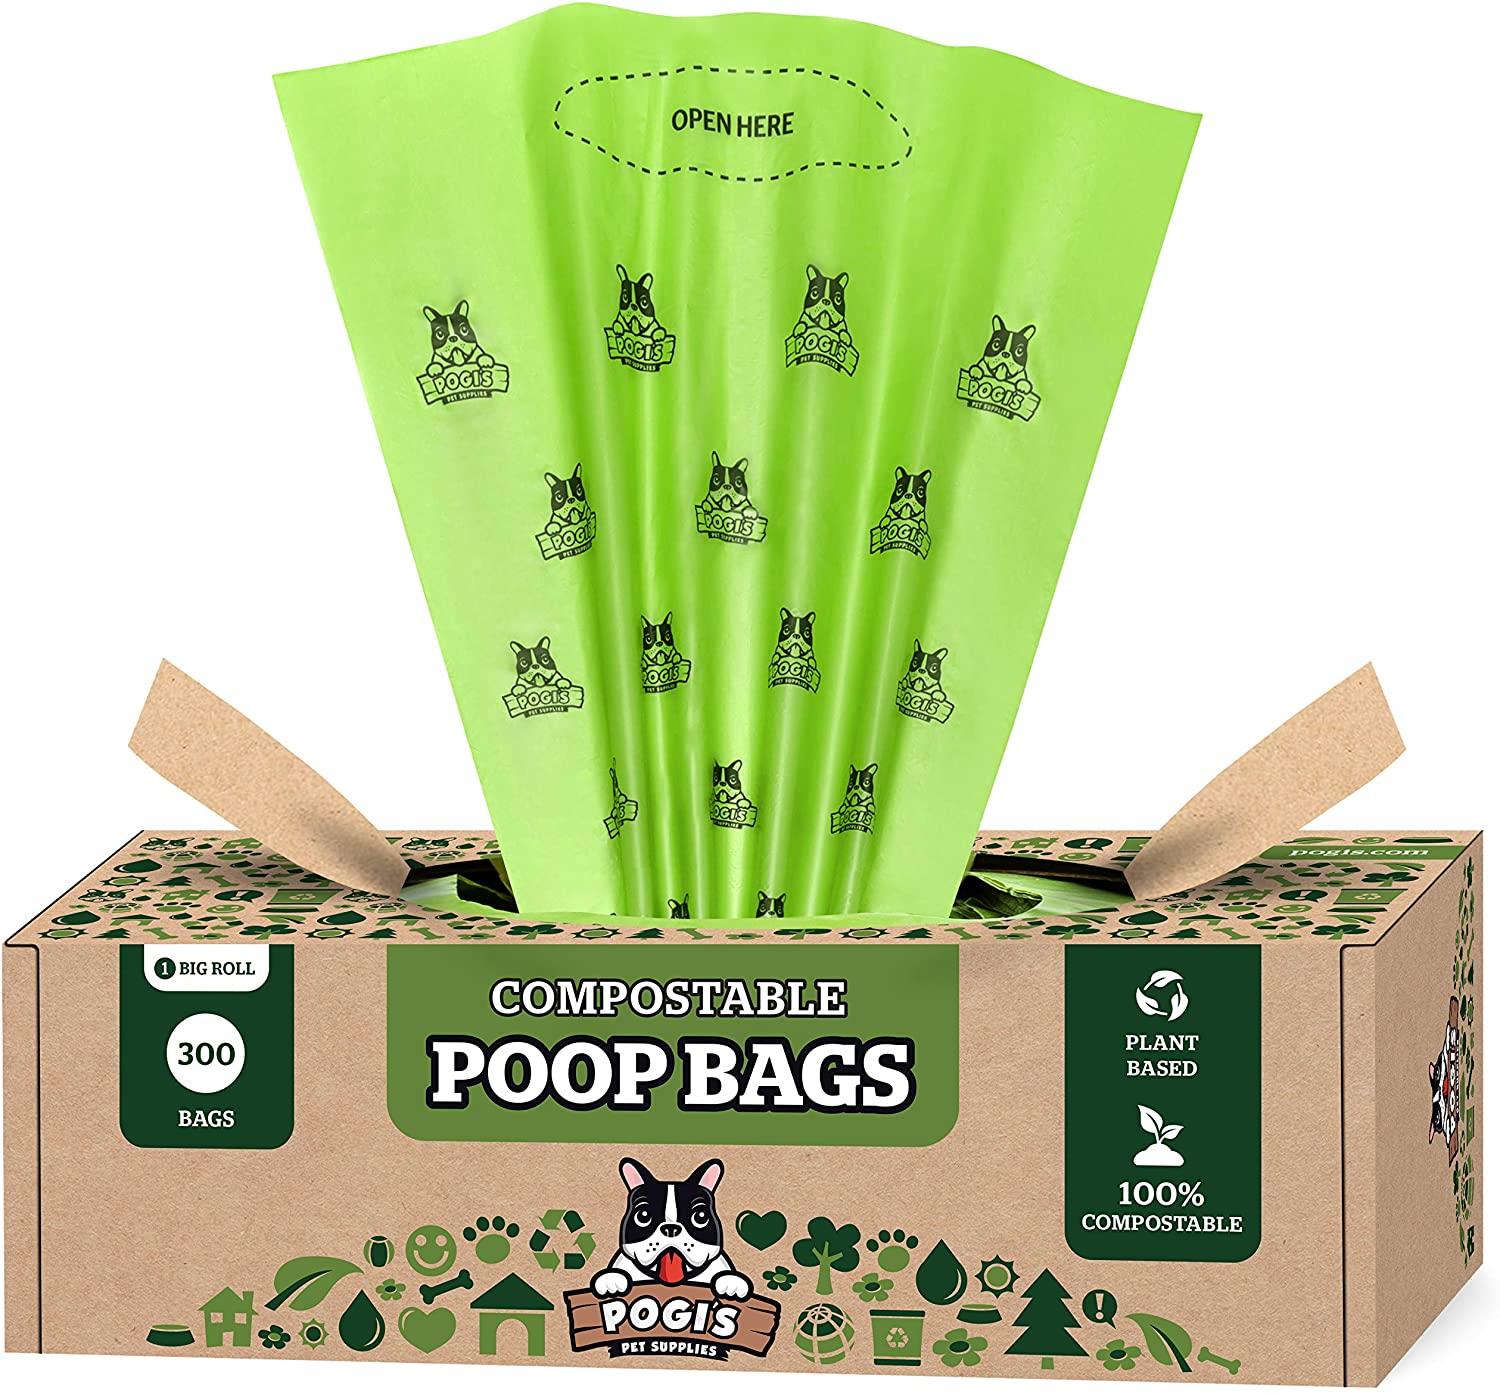 Large Biodegradable Poop Waste Bag With Handles By Pogi's Pet Supplies